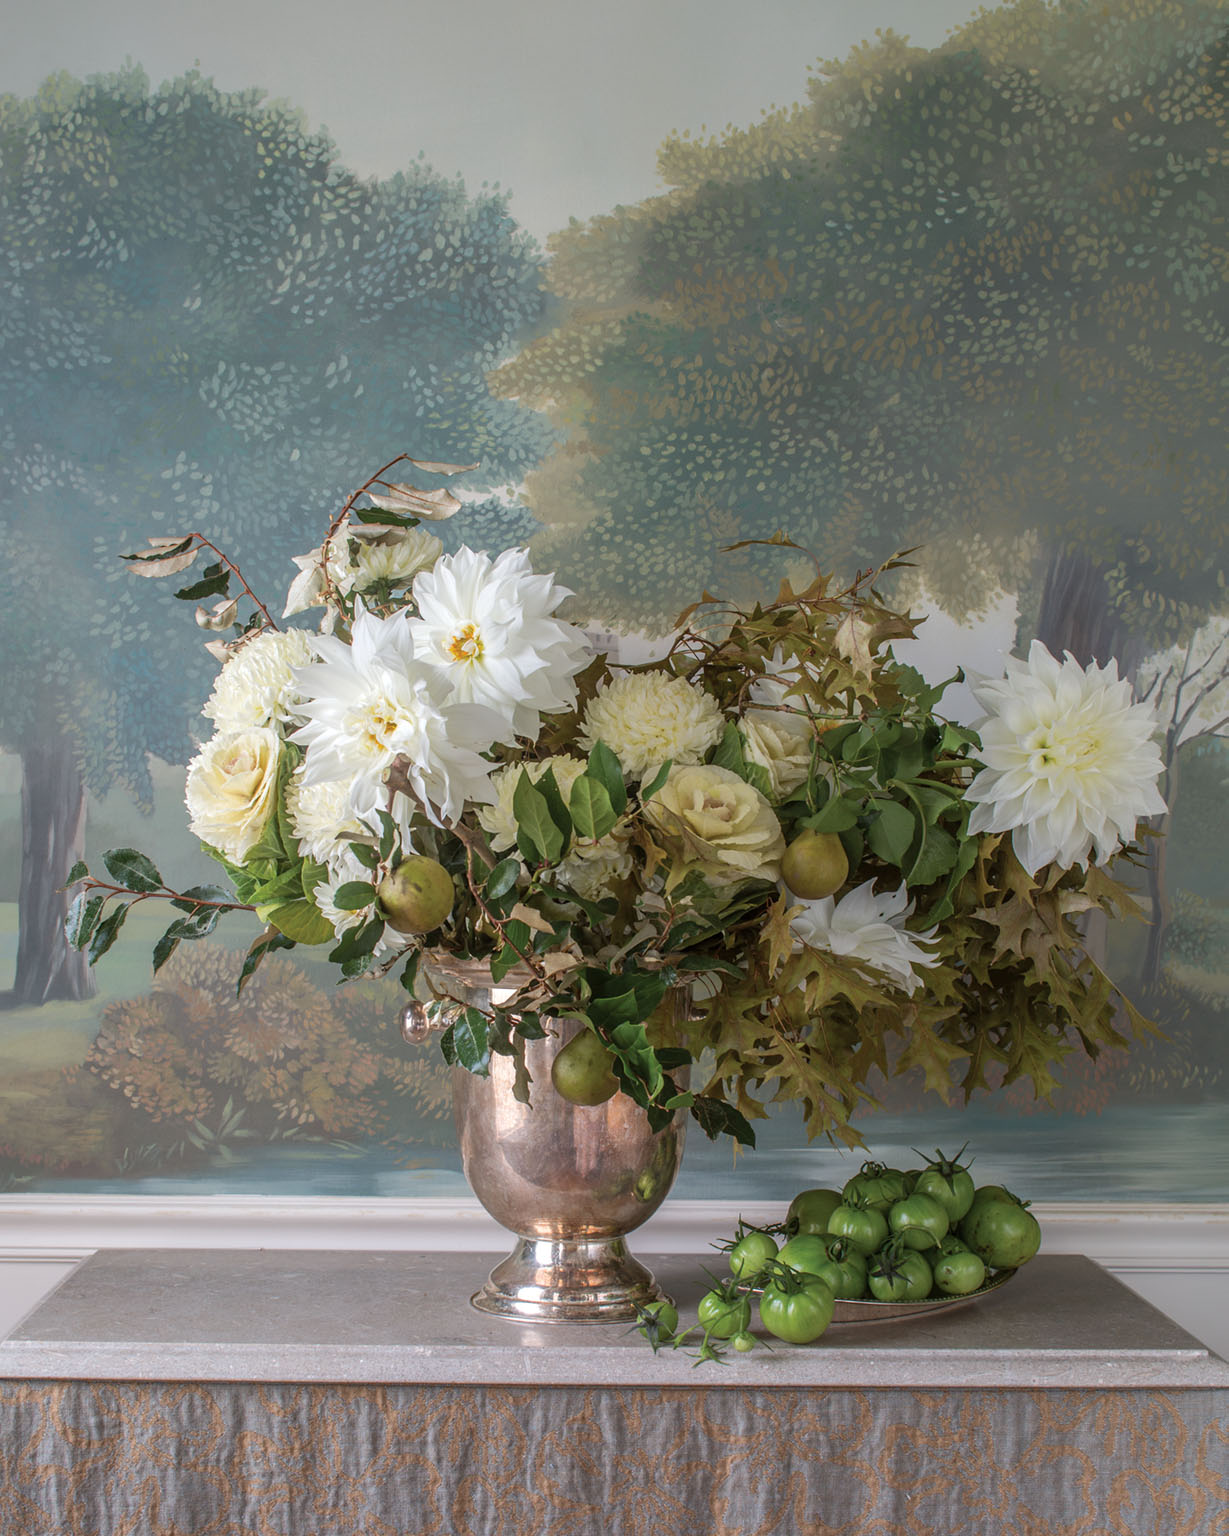 white and green floral arrangement by Sidra Forman in a silver footed vessel against the backdrop of a scenic wallpaper featuring trees